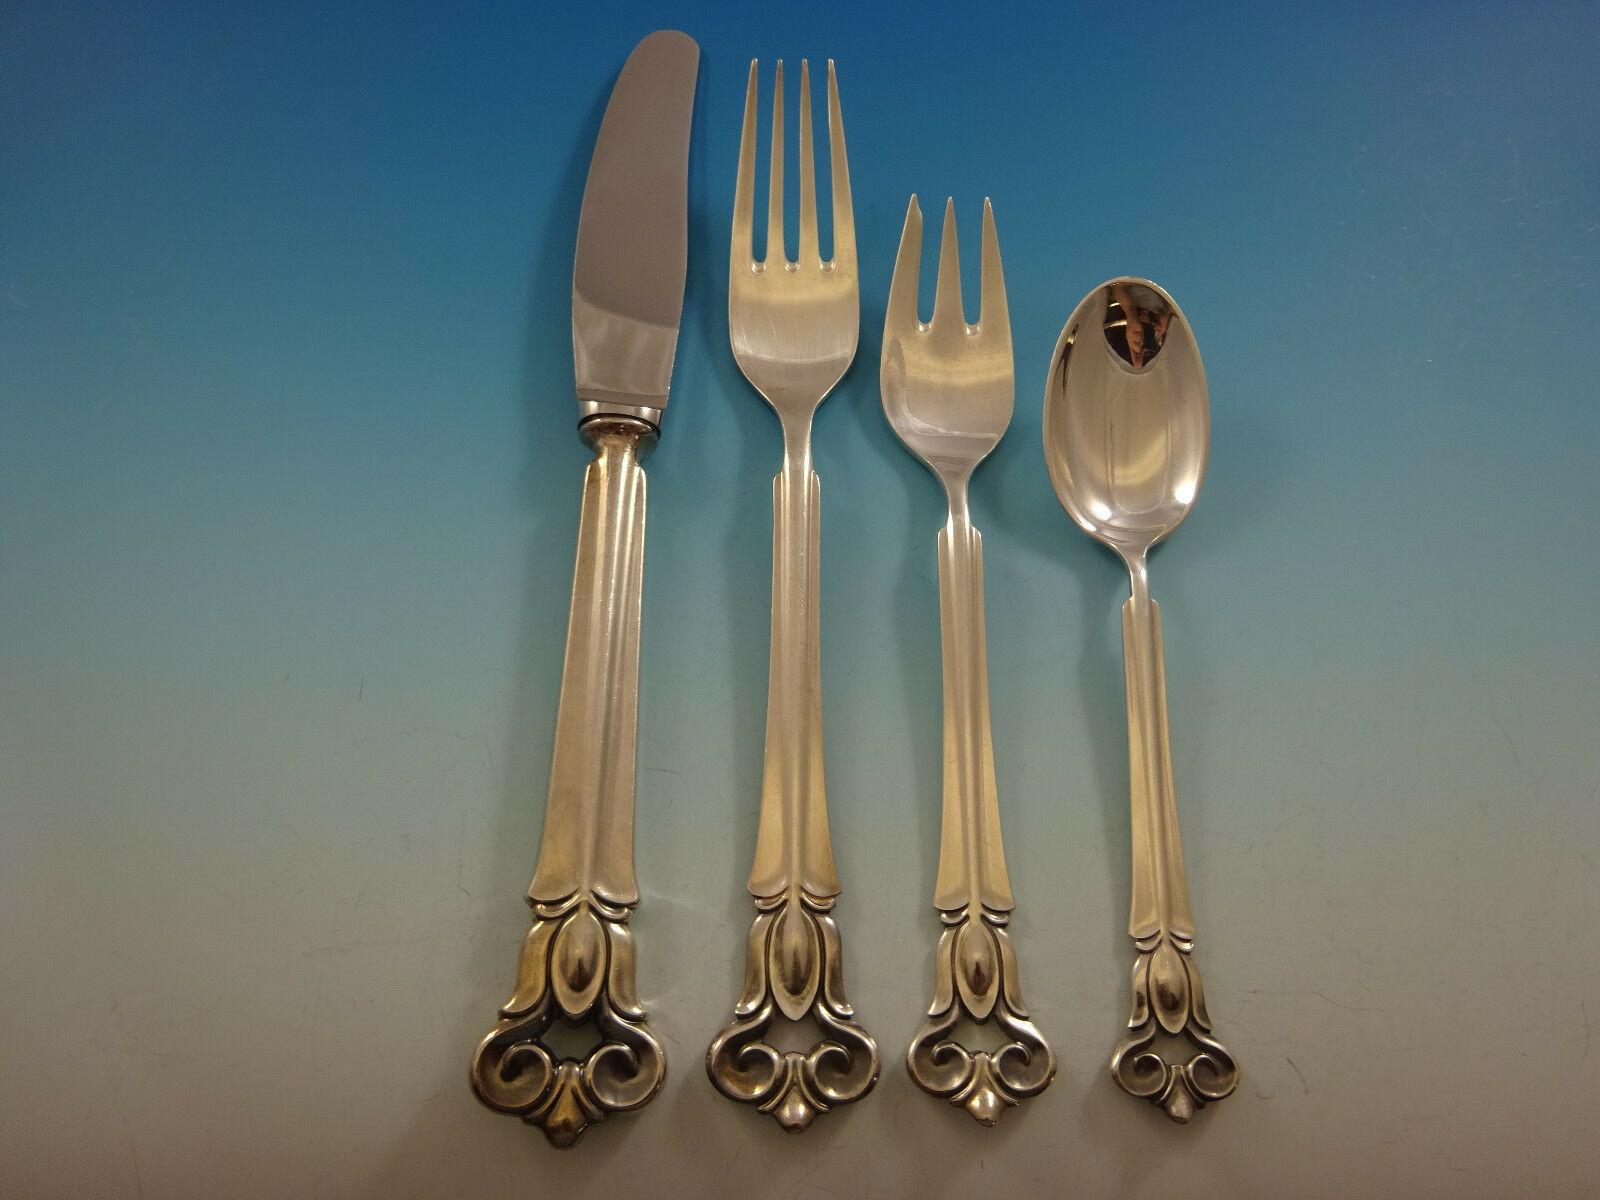 Monumental Monica by Cohr Danish sterling silver flatware set - 113 pieces. This set includes:

12 knives, 8 3/4